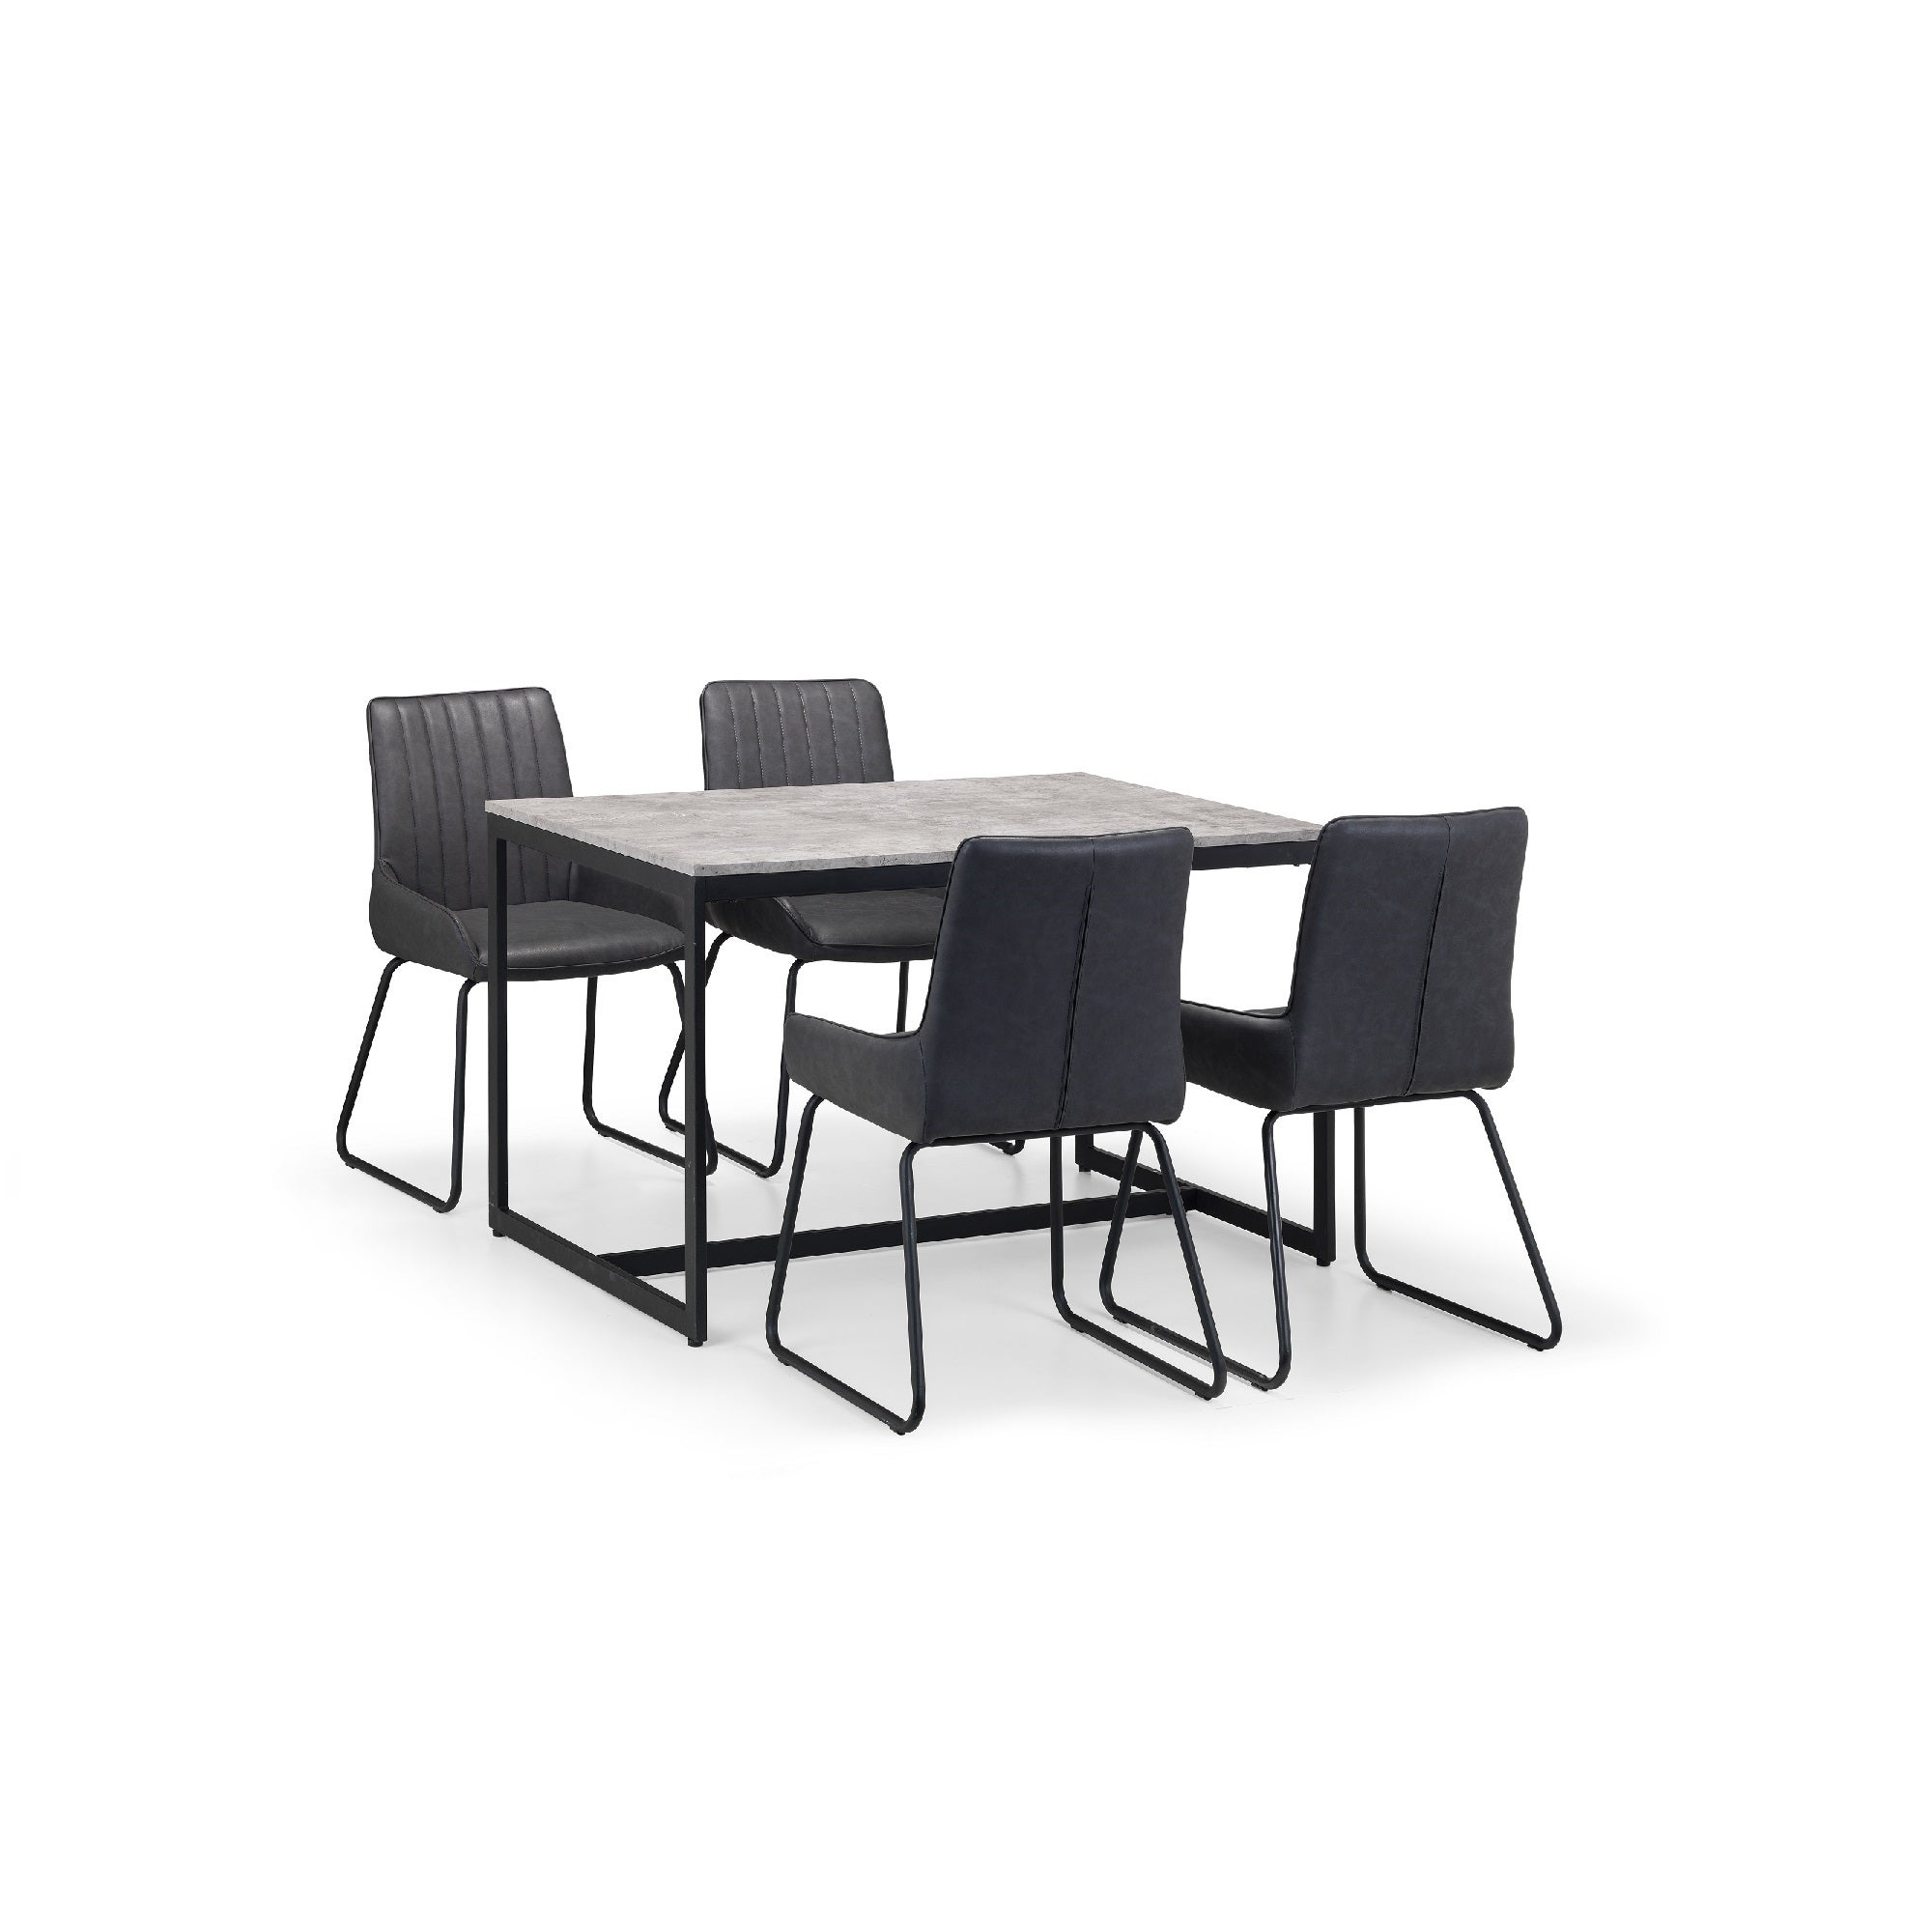 Staten Rectangular Dining Table with 4 Soho Chairs, Grey